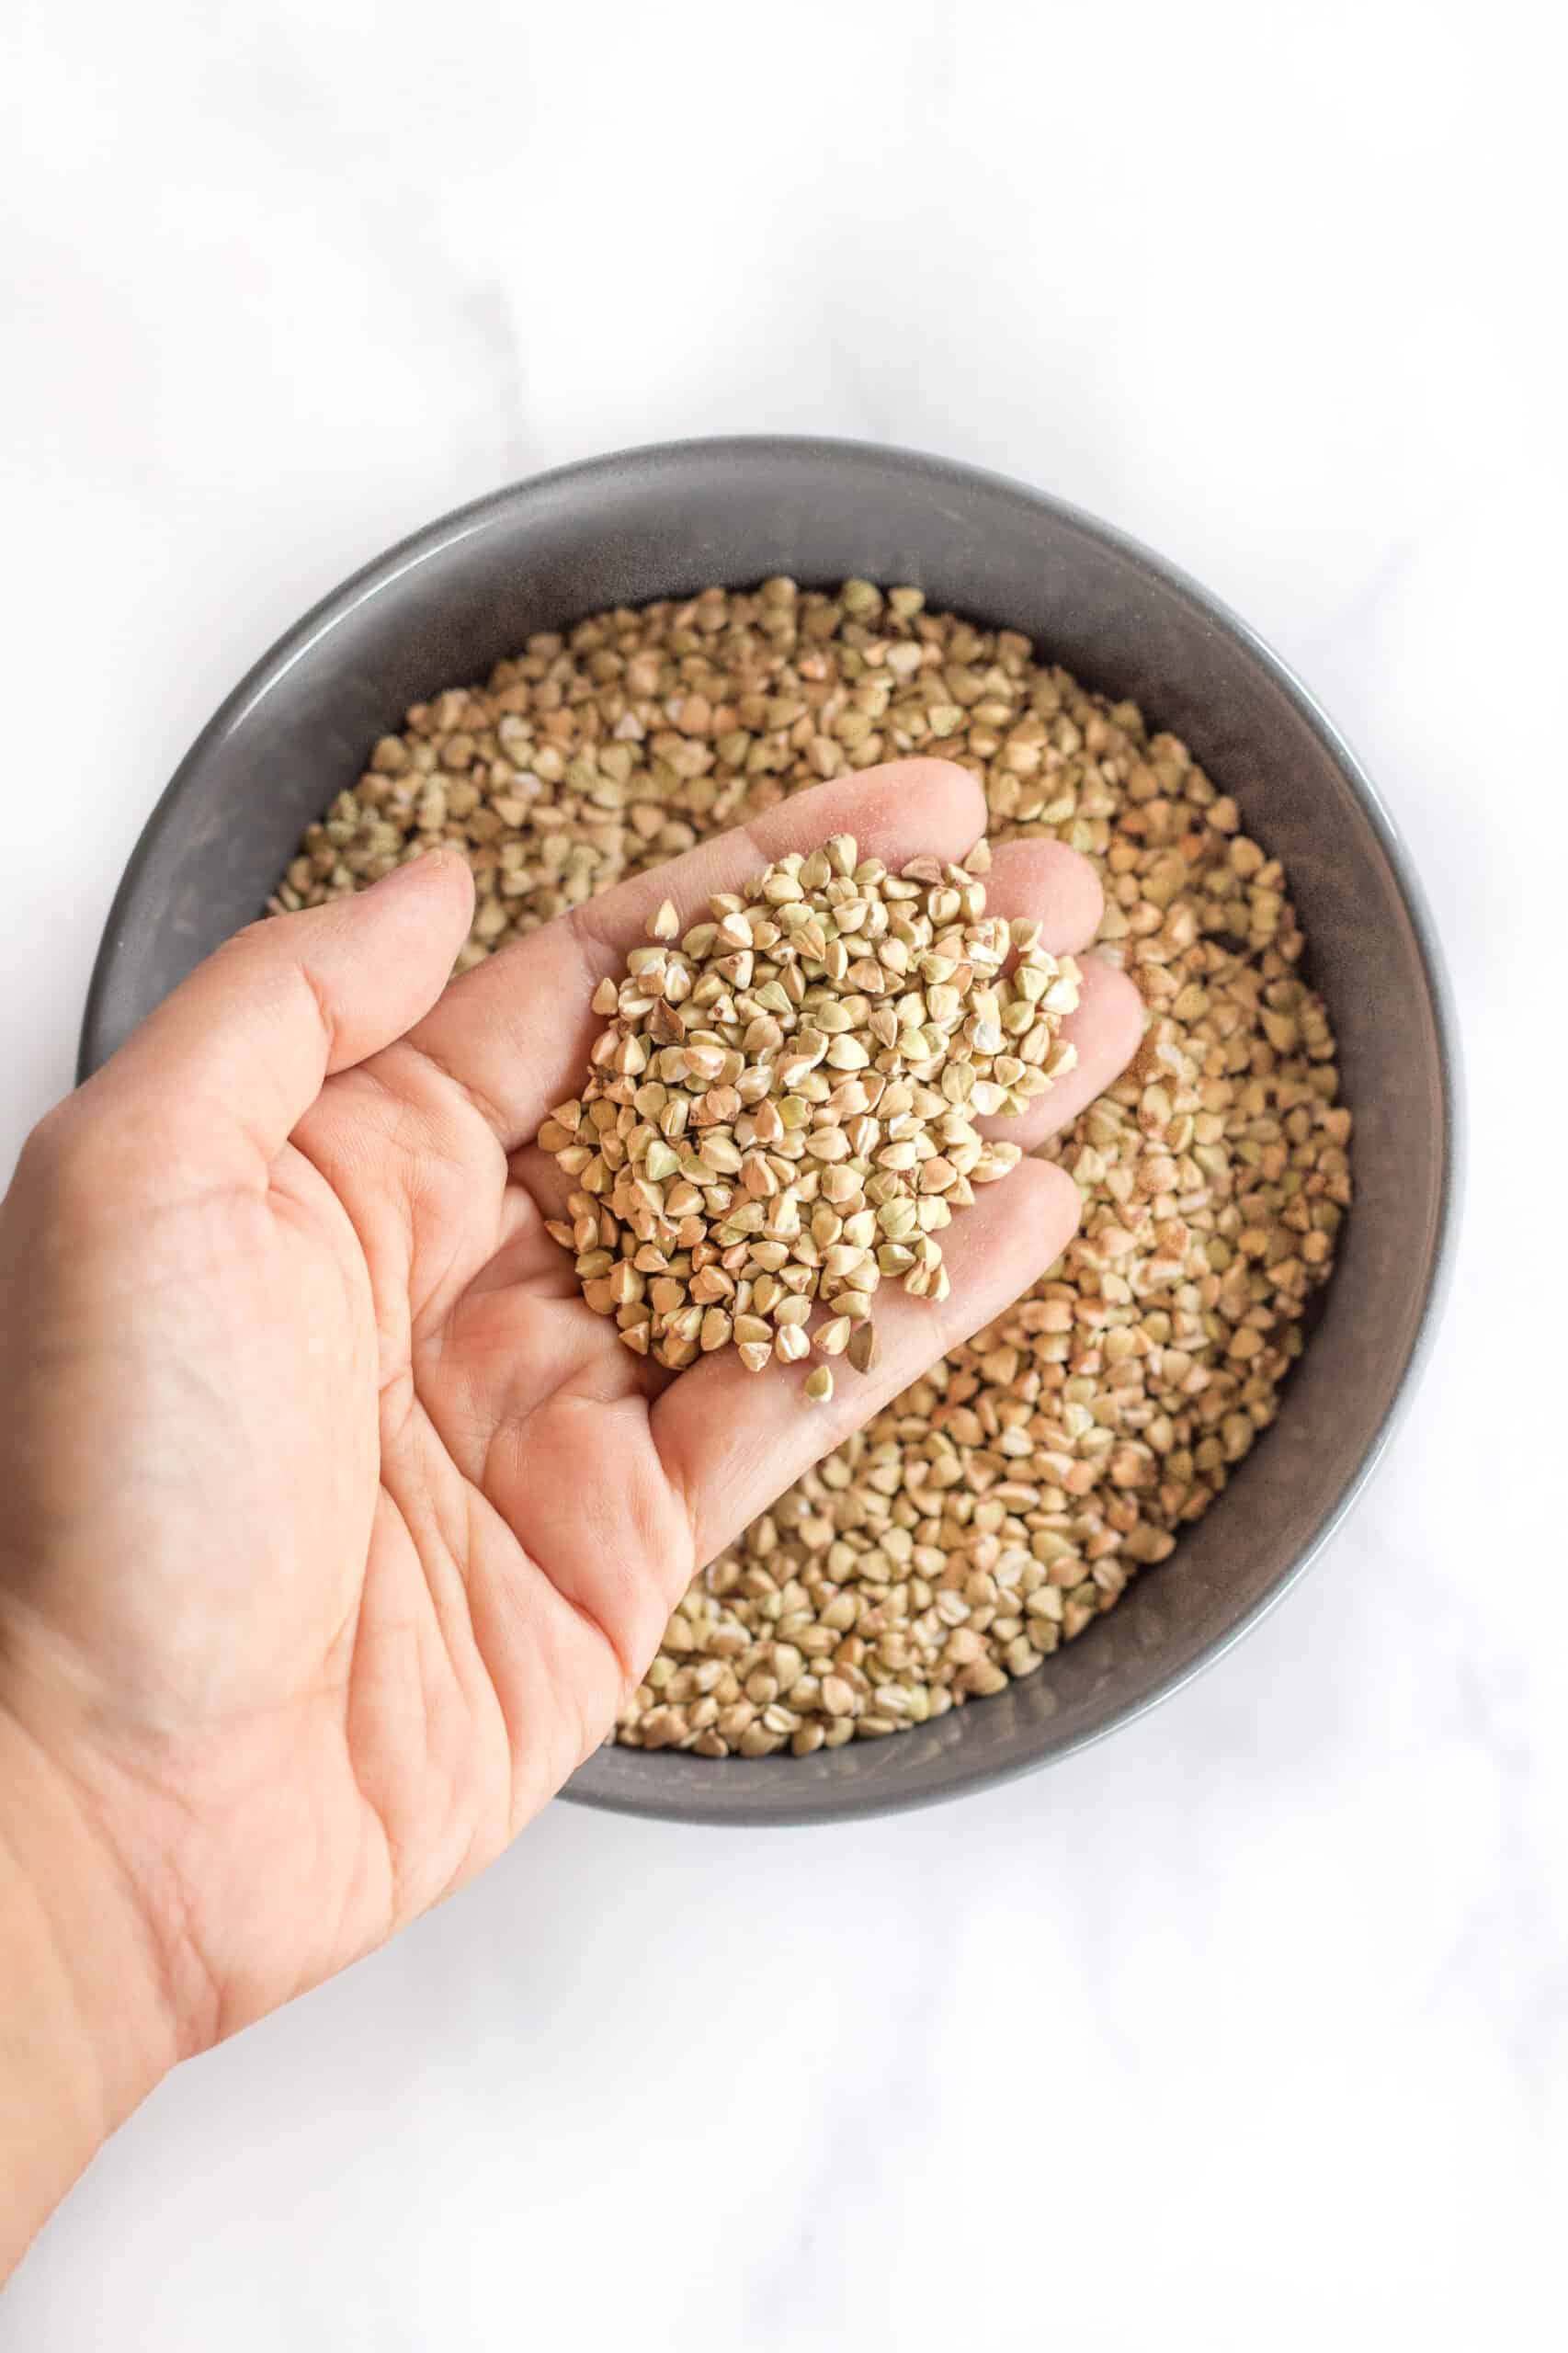 Holding up a handful of buckwheat groats from a grey bowl.